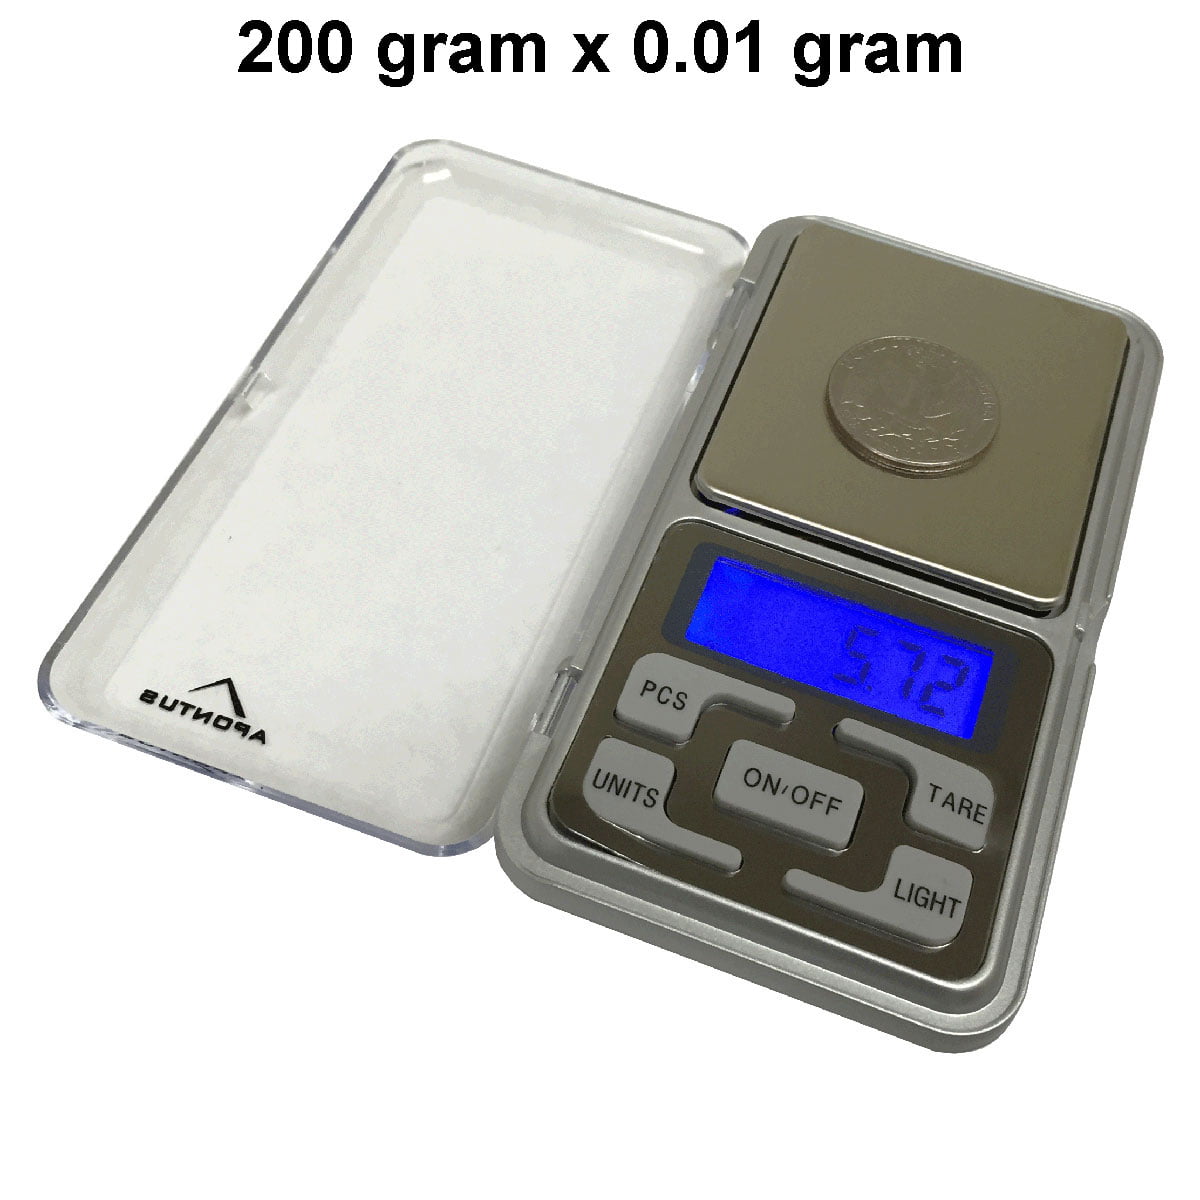 Digital Scale 0.01G to 200G Grams Pocket Weighing Mini Kitchen Jewellery Scales 